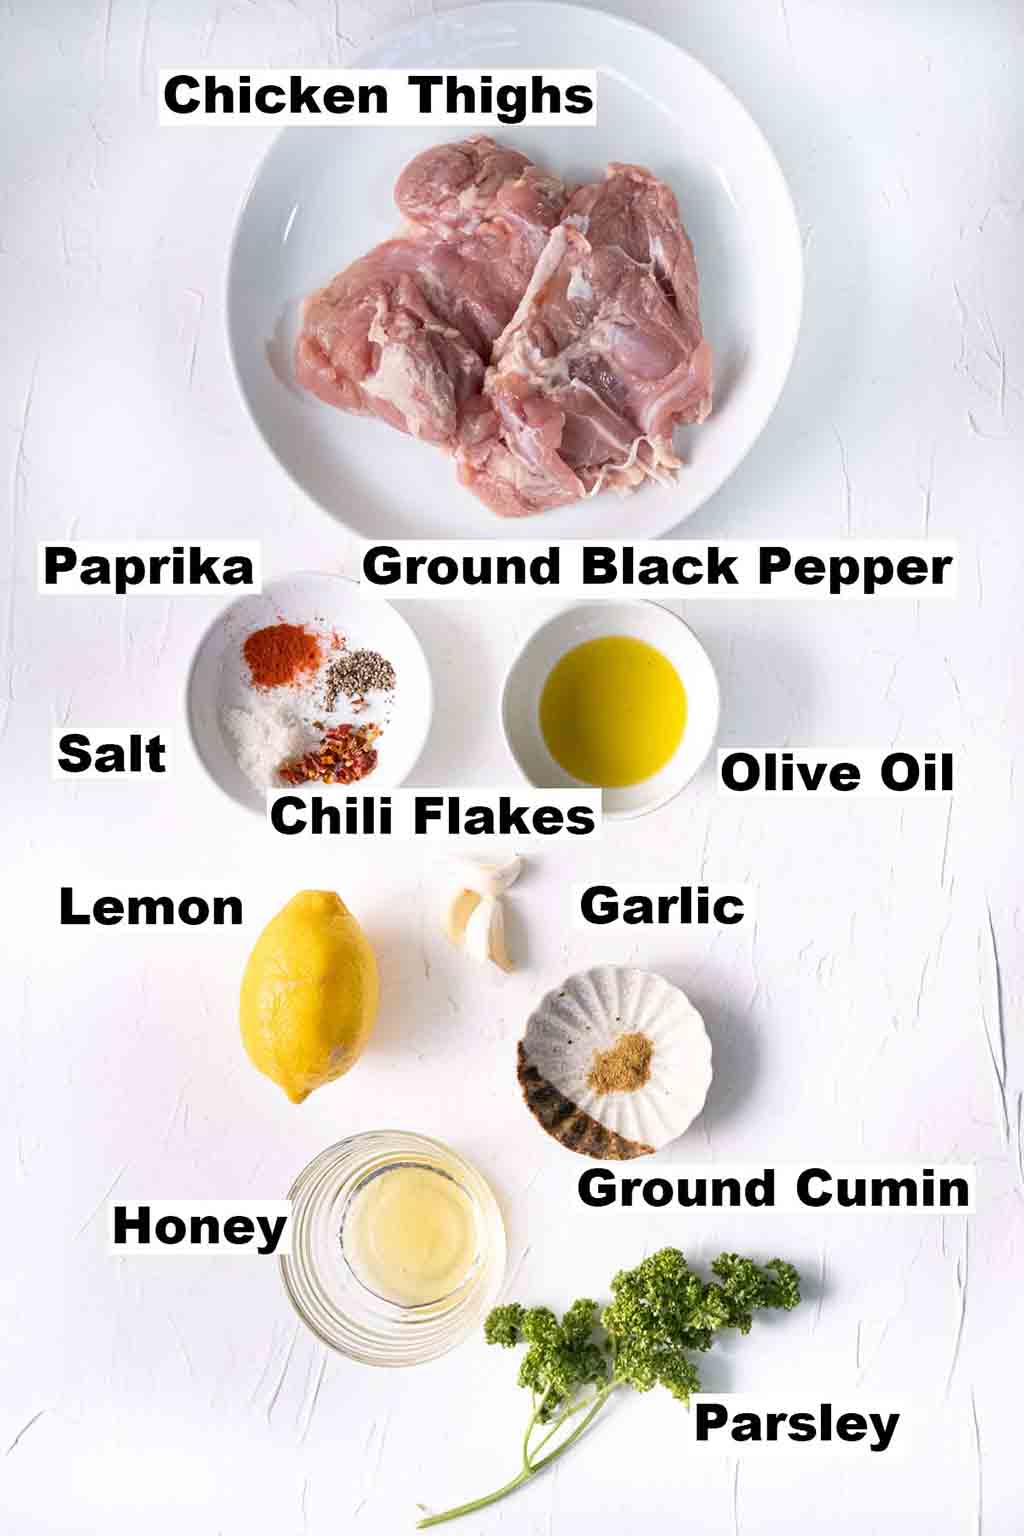 This image contains ingredients such as chicken thighs, paprika, ground black pepper, salt, chili flakes, olive oil. lemon, garlic, honey ground cumin and parsley which are needed to make the Lemon Garlic Chicken recipe.